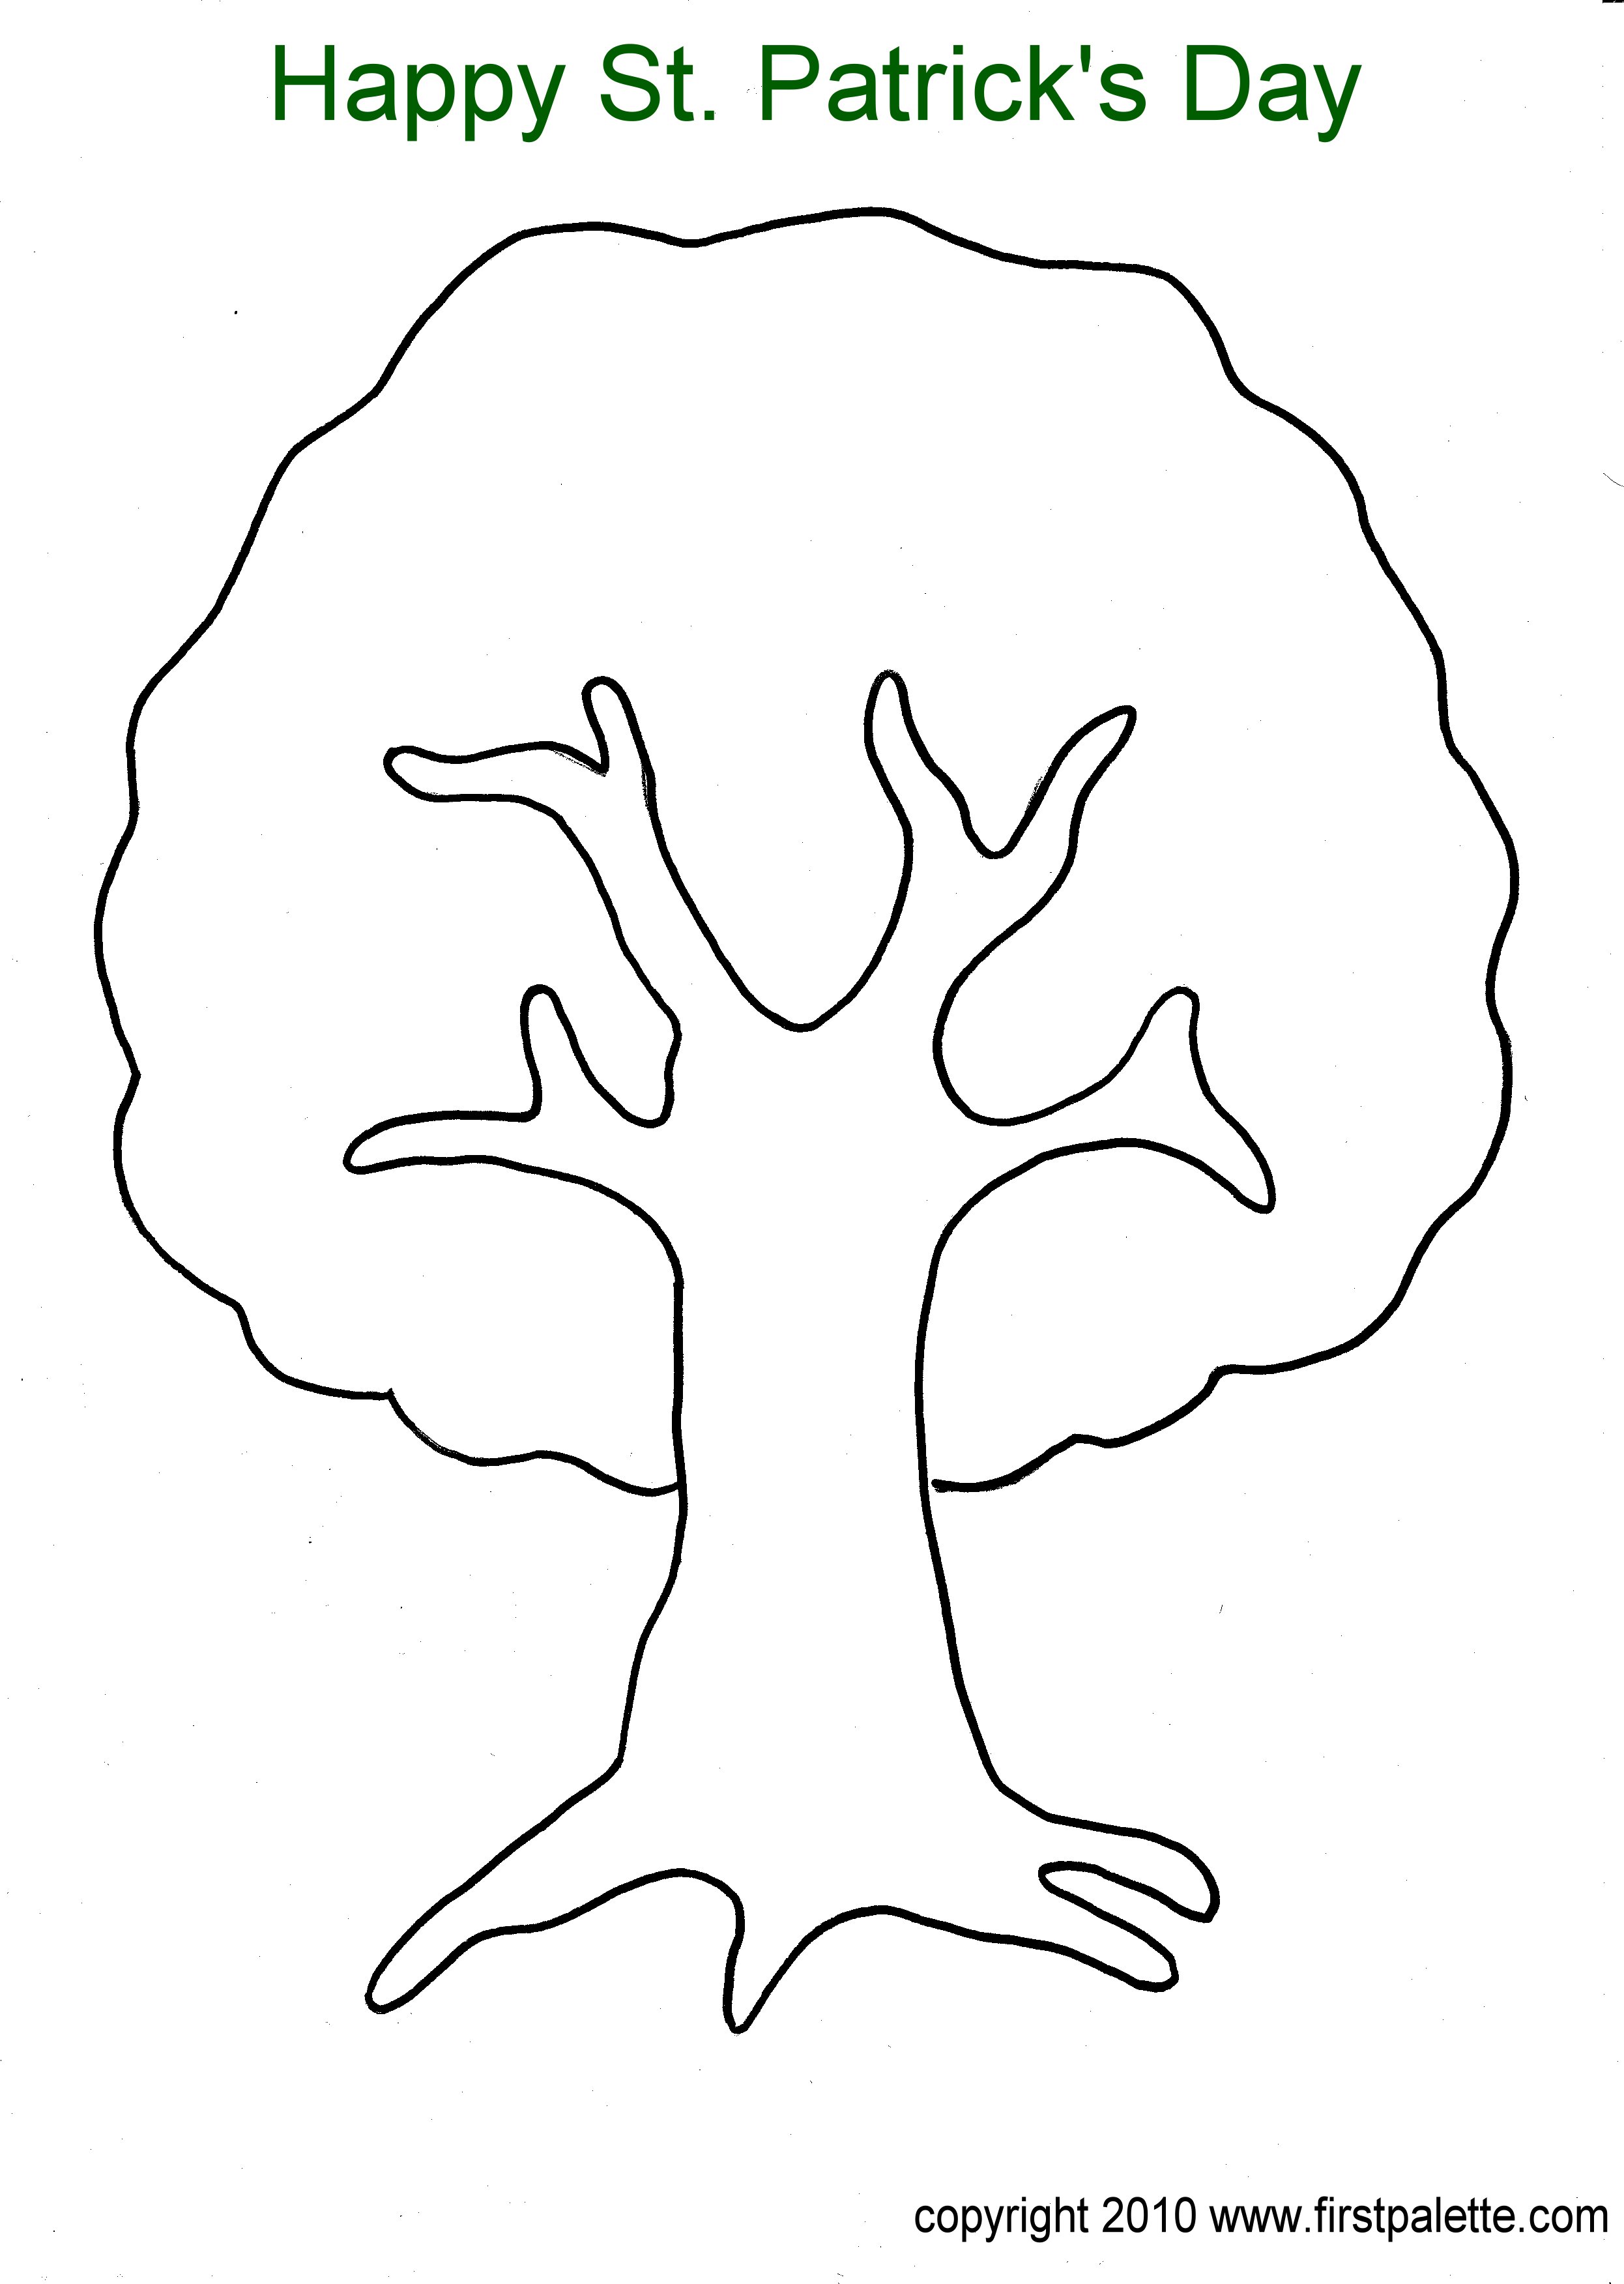 Printable Picture Of A Tree